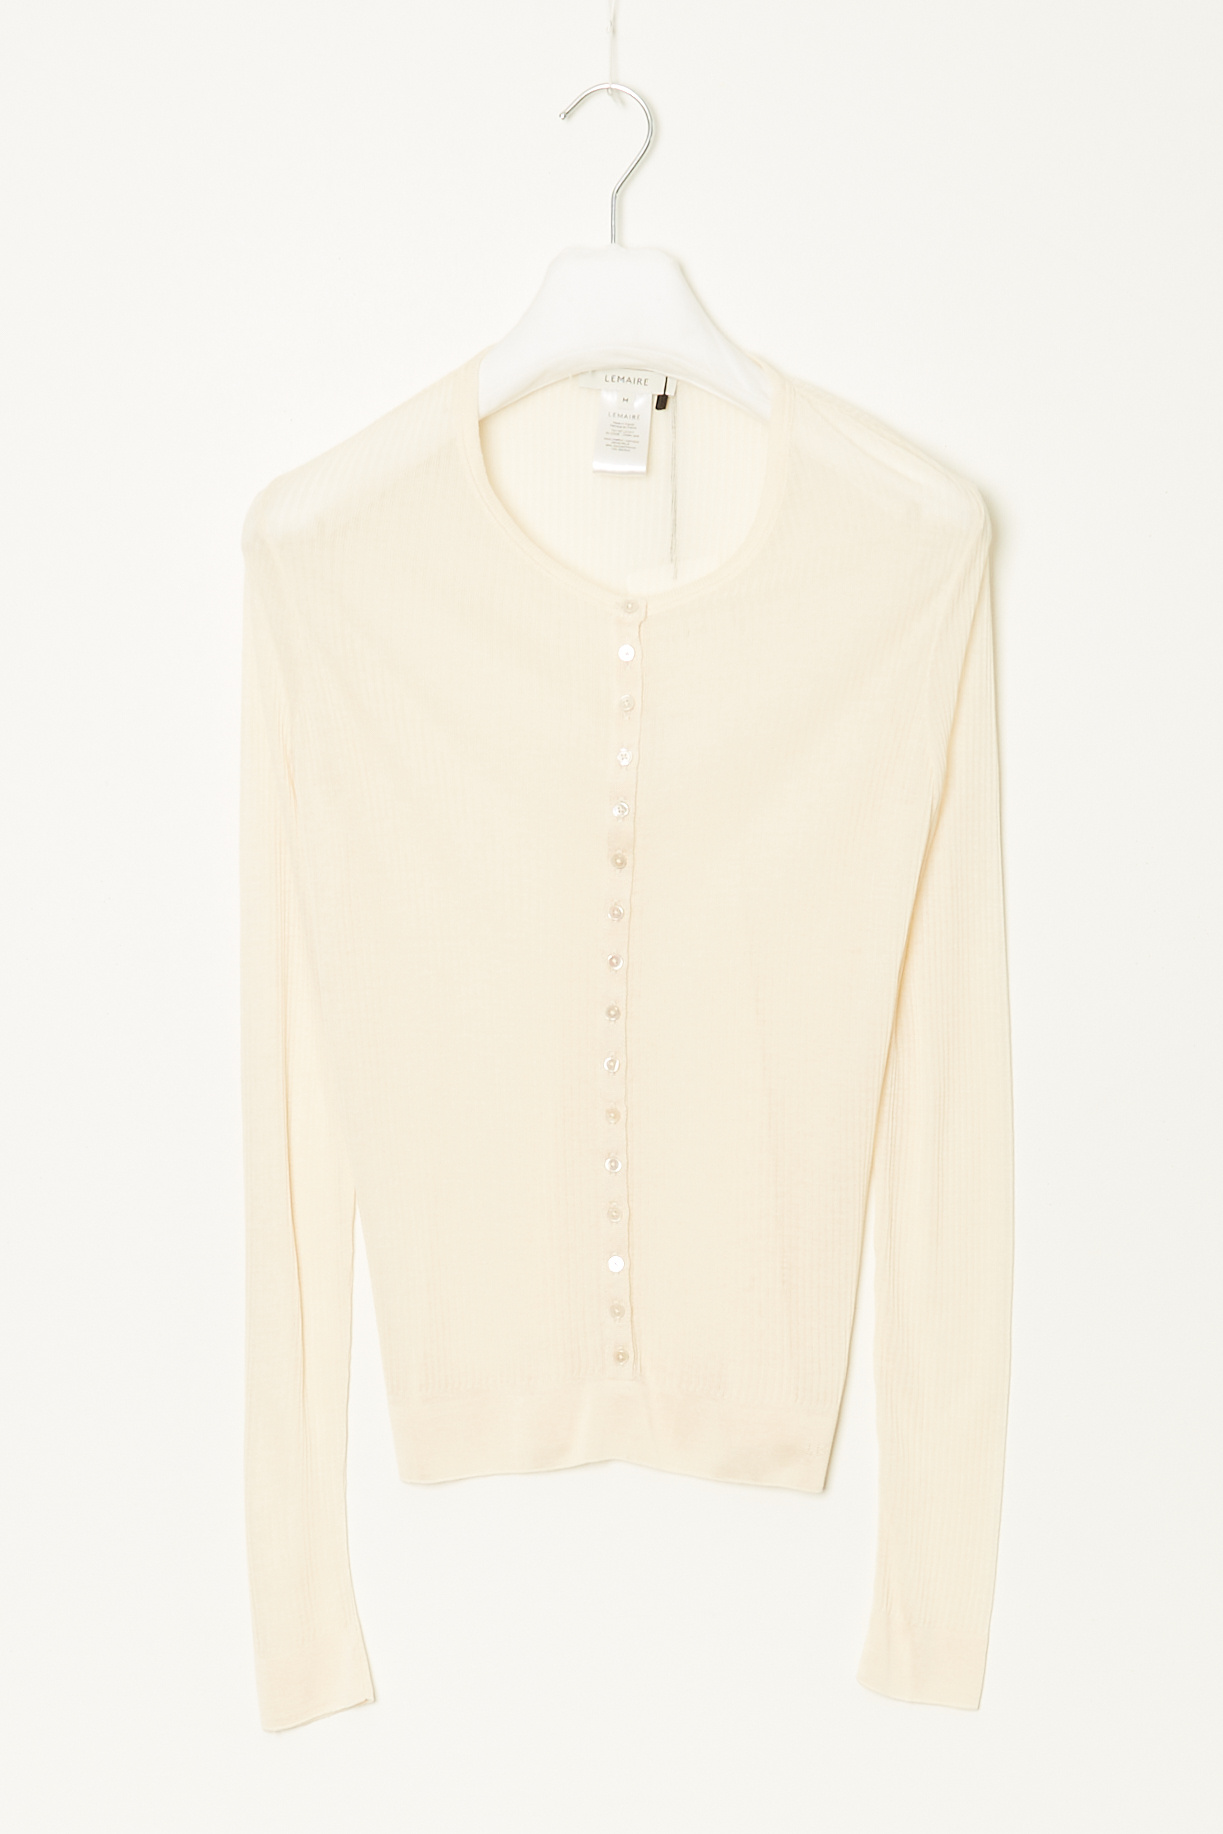 Lemaire - Seamless rib top with buttons